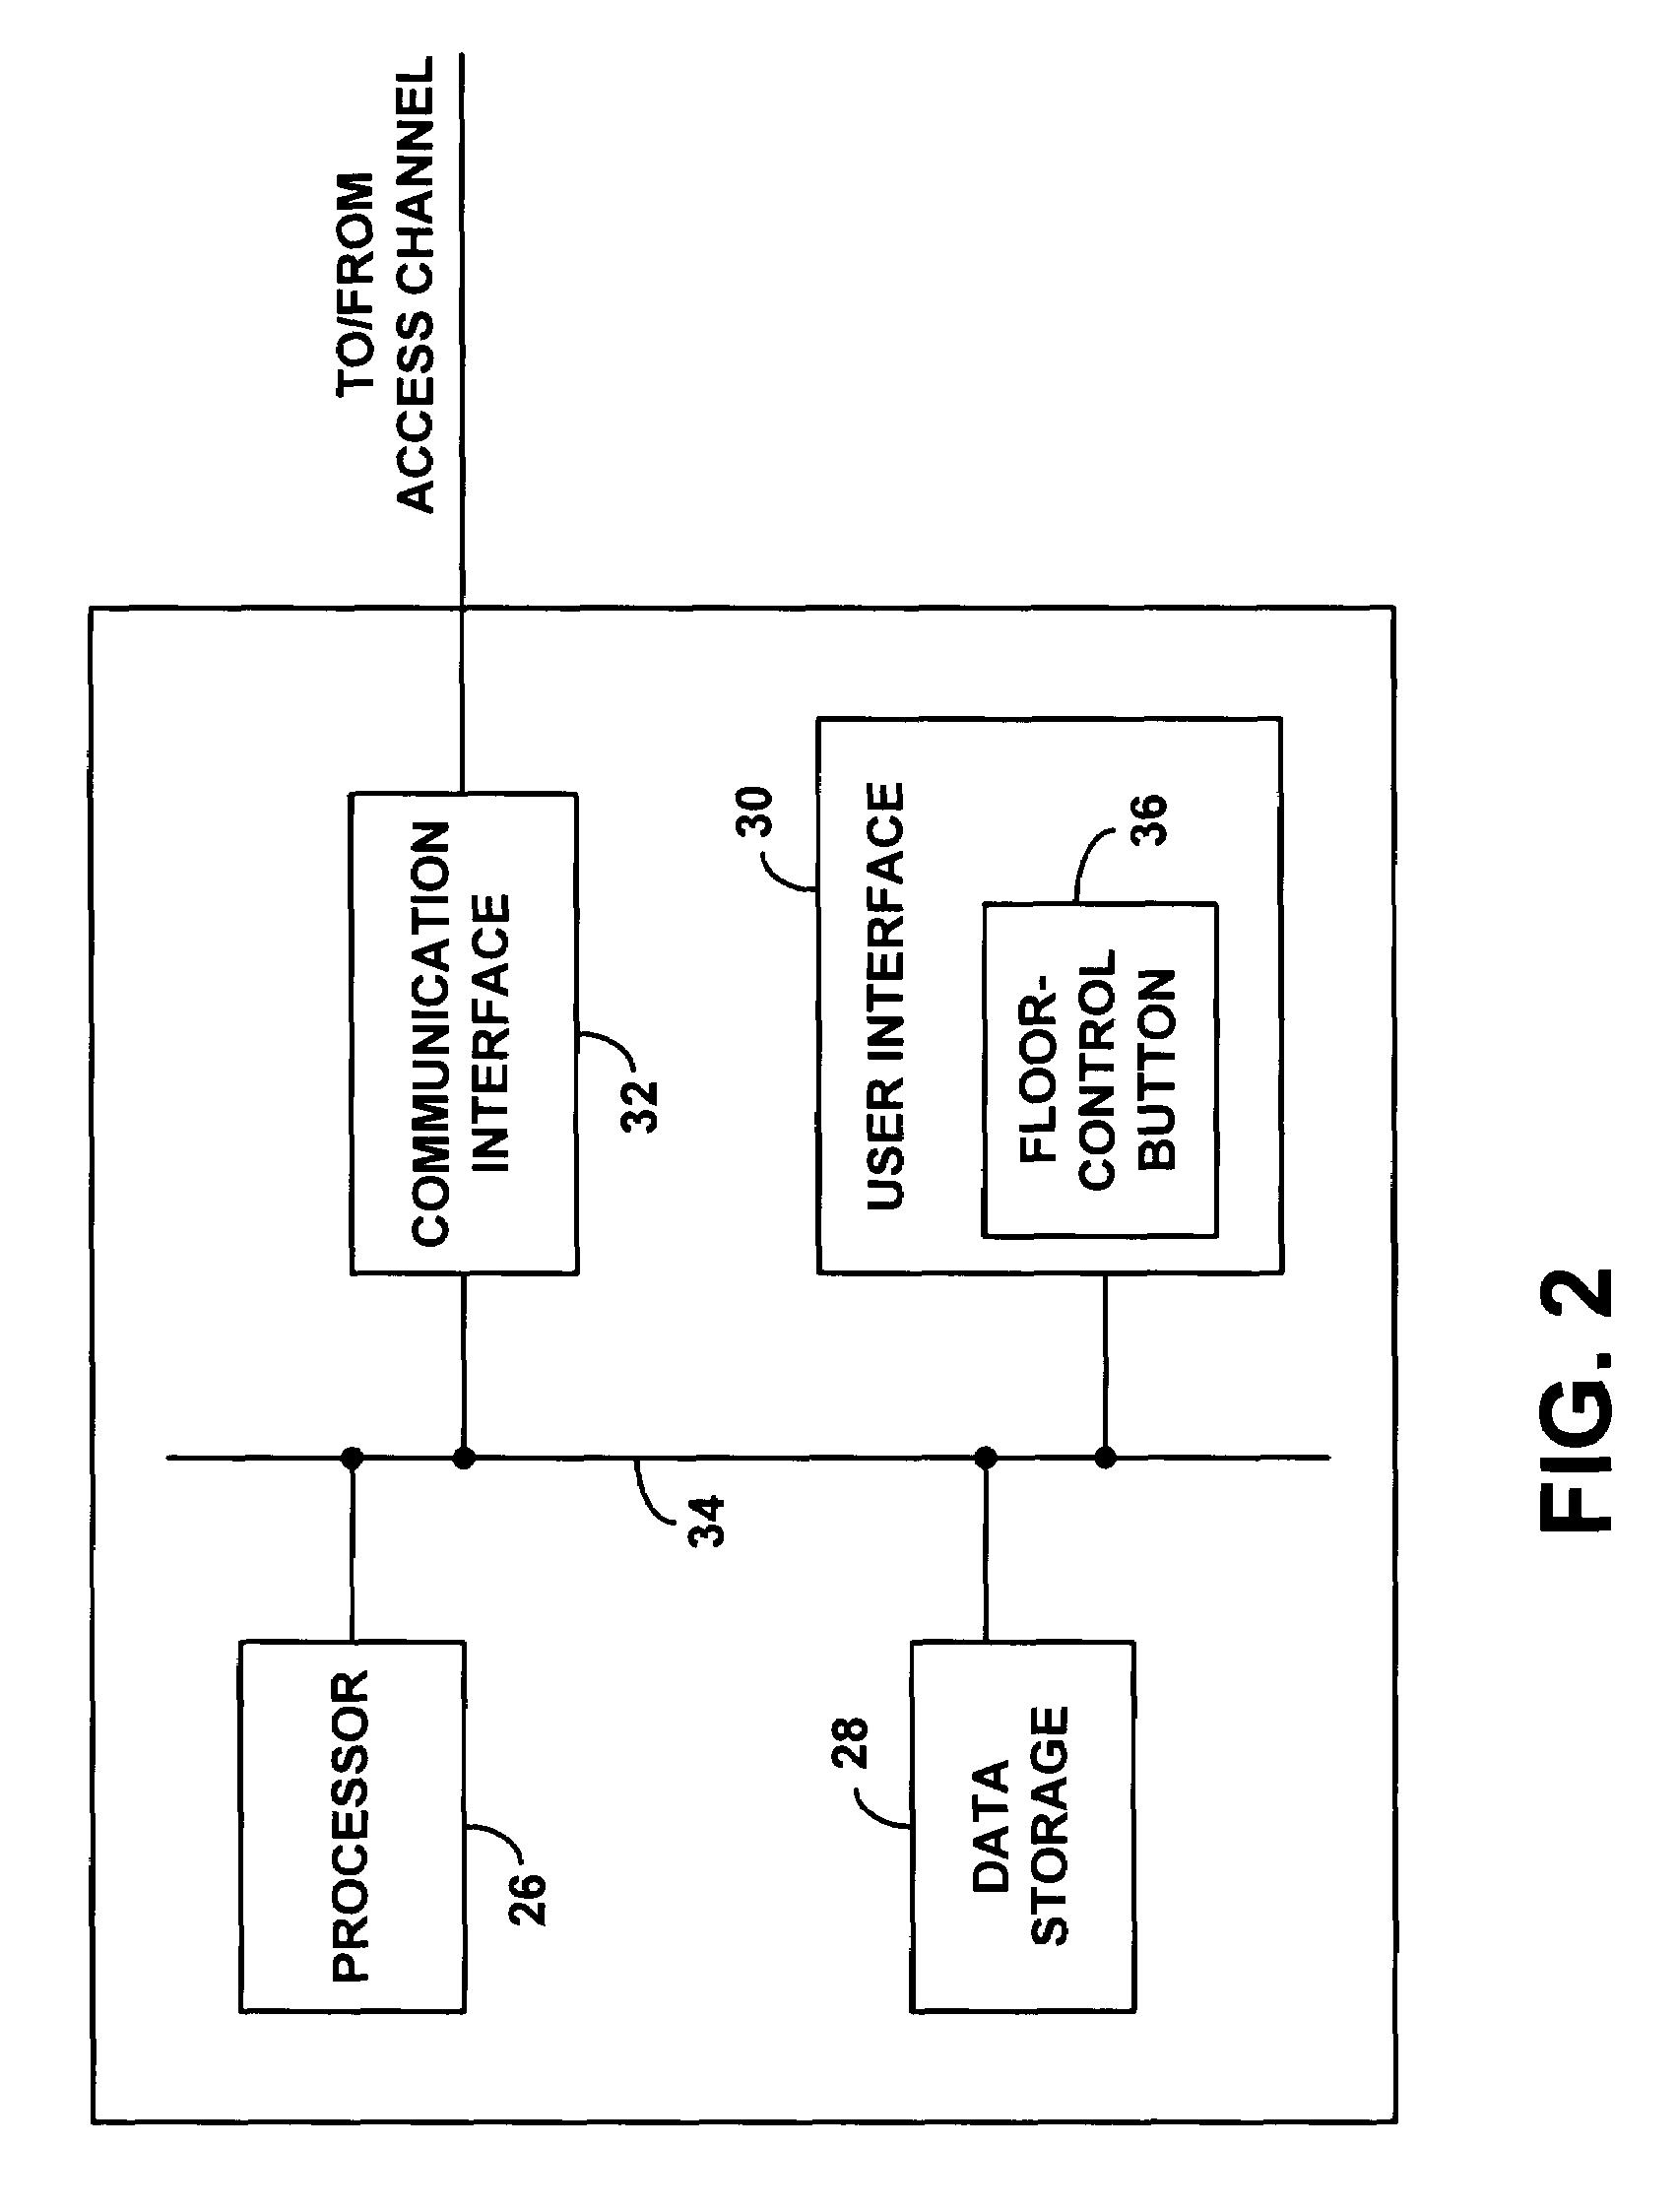 Method and system for selectively operating in a half-duplex mode or full-duplex mode in a packet-based real-time media conference